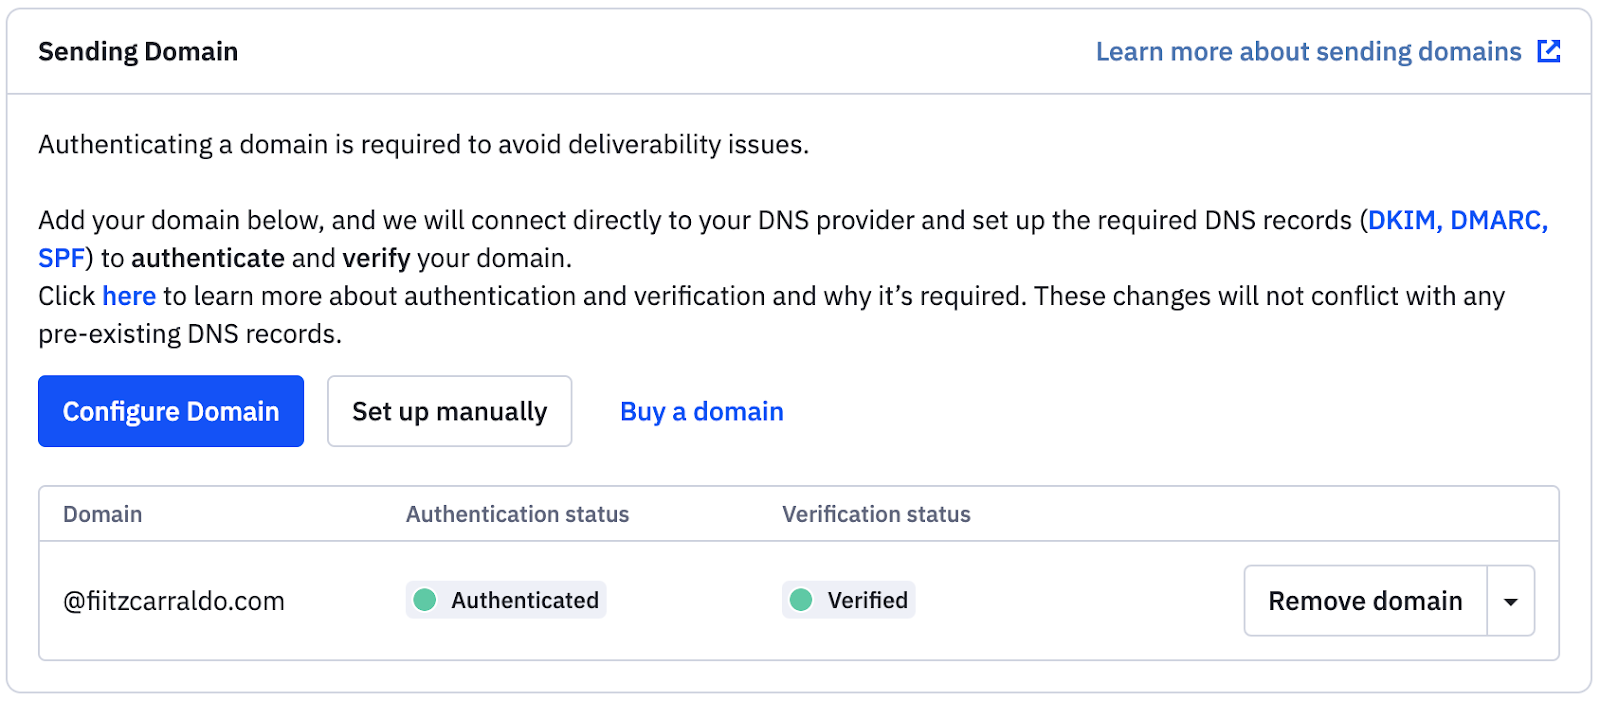 Authentication and Verification Status in the Sending Domain window in Advanced Settings.png